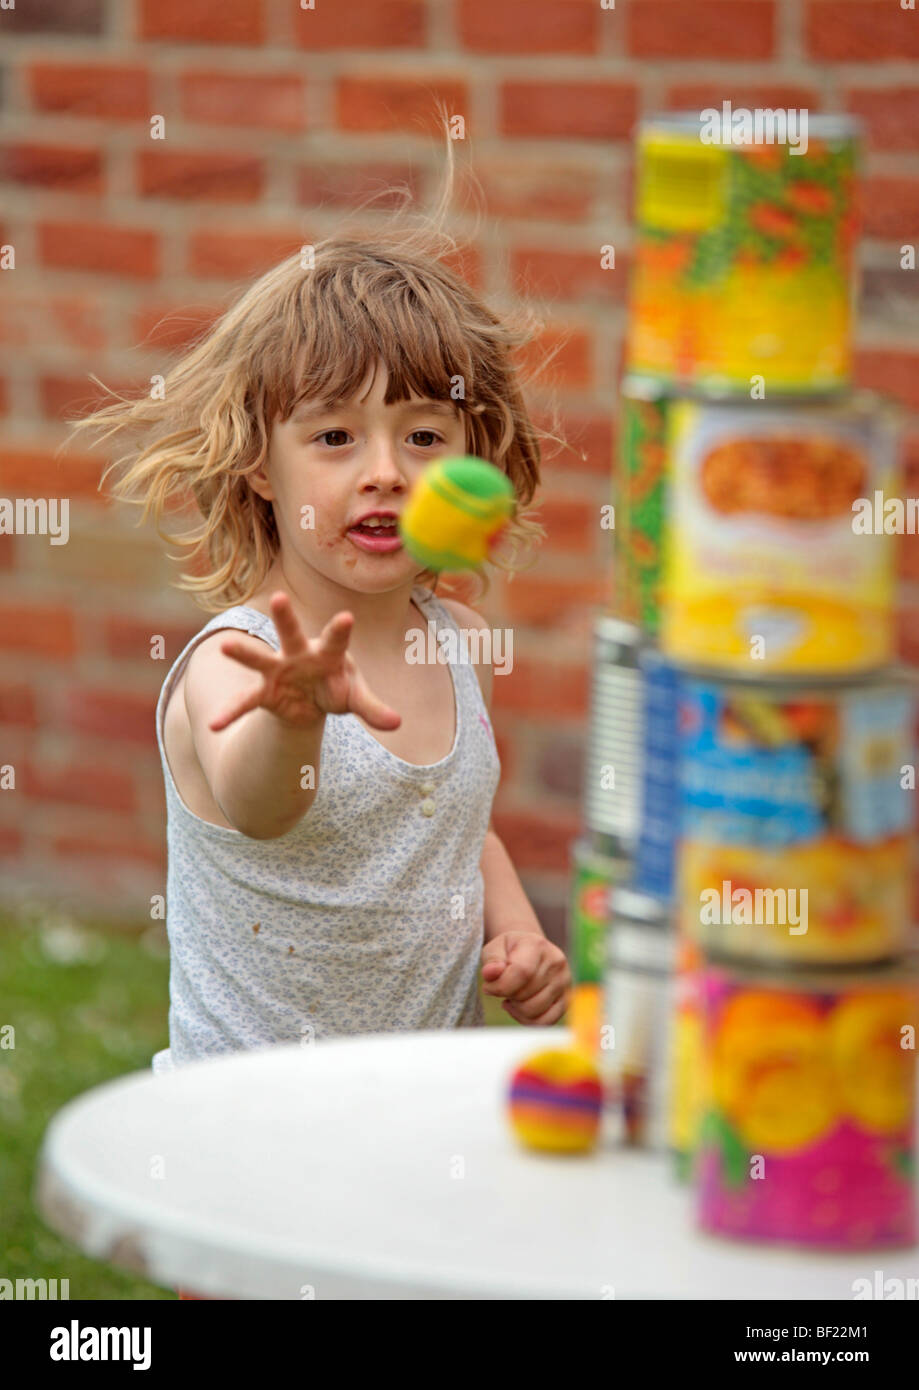 a young girl throwing a ball at a pyramid of cans at a children's birthday party Stock Photo